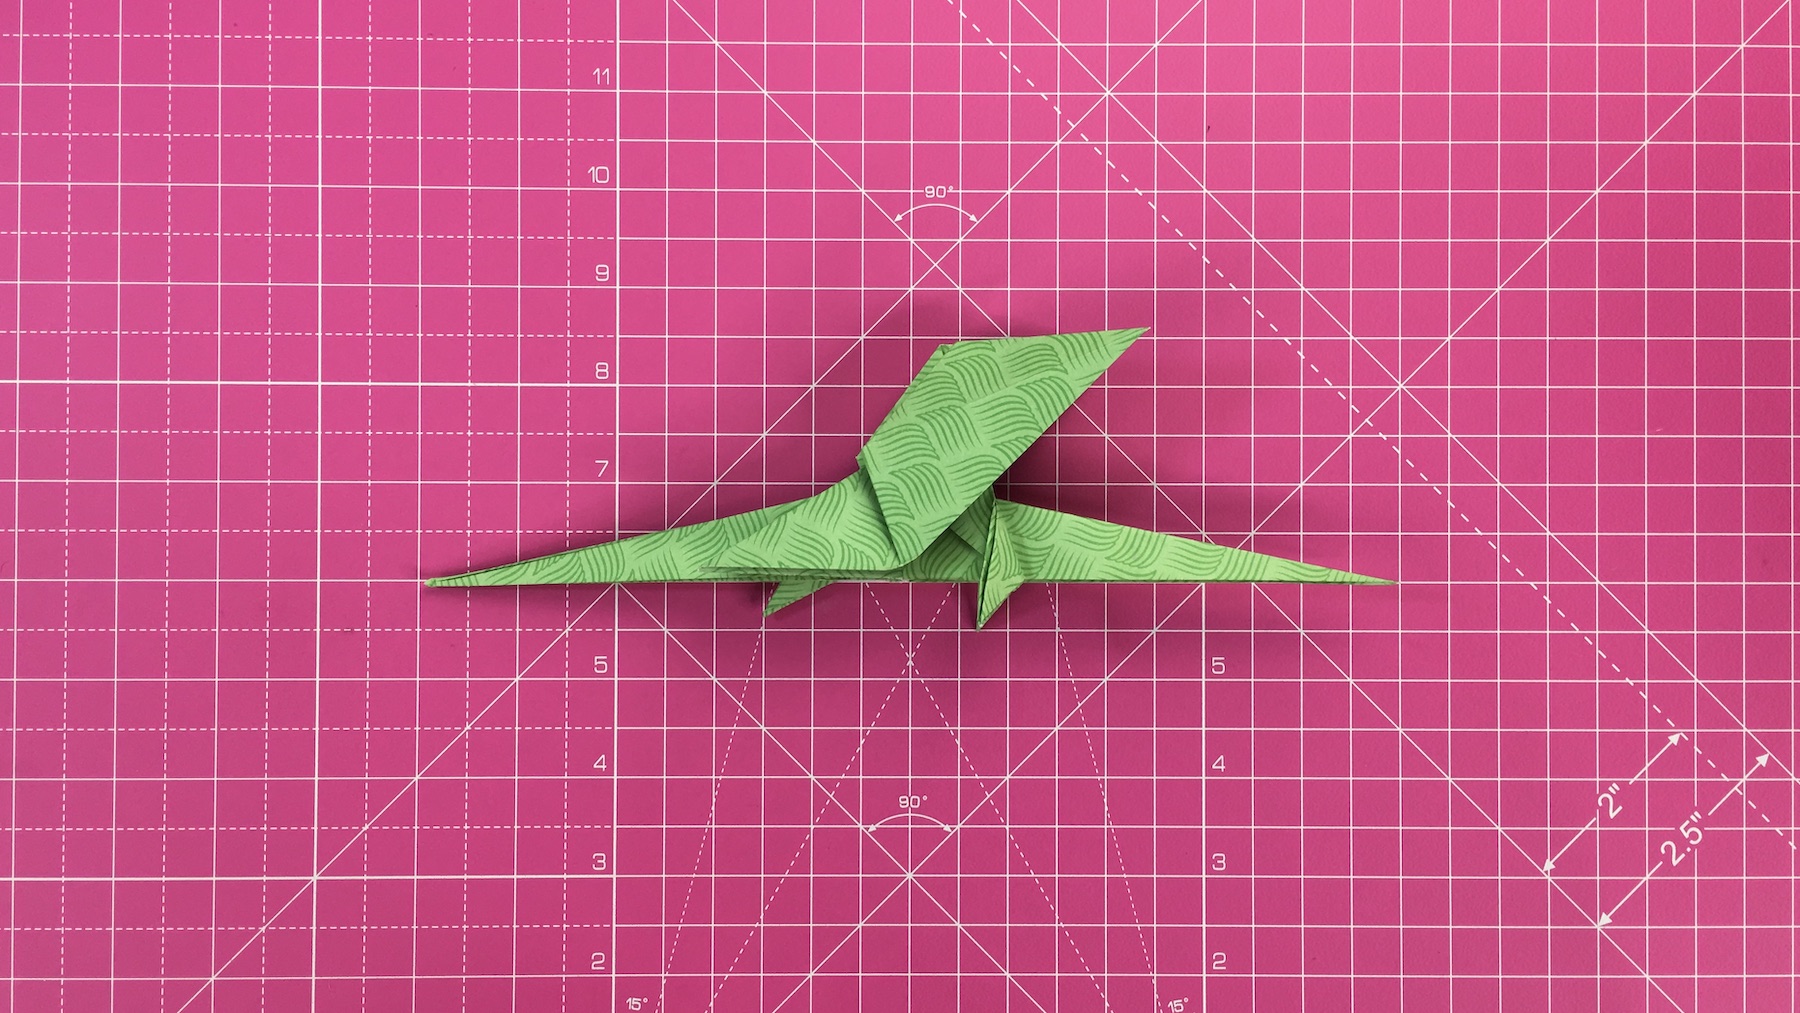 How to make an origami dragon, origami dragon tutorial - step 42